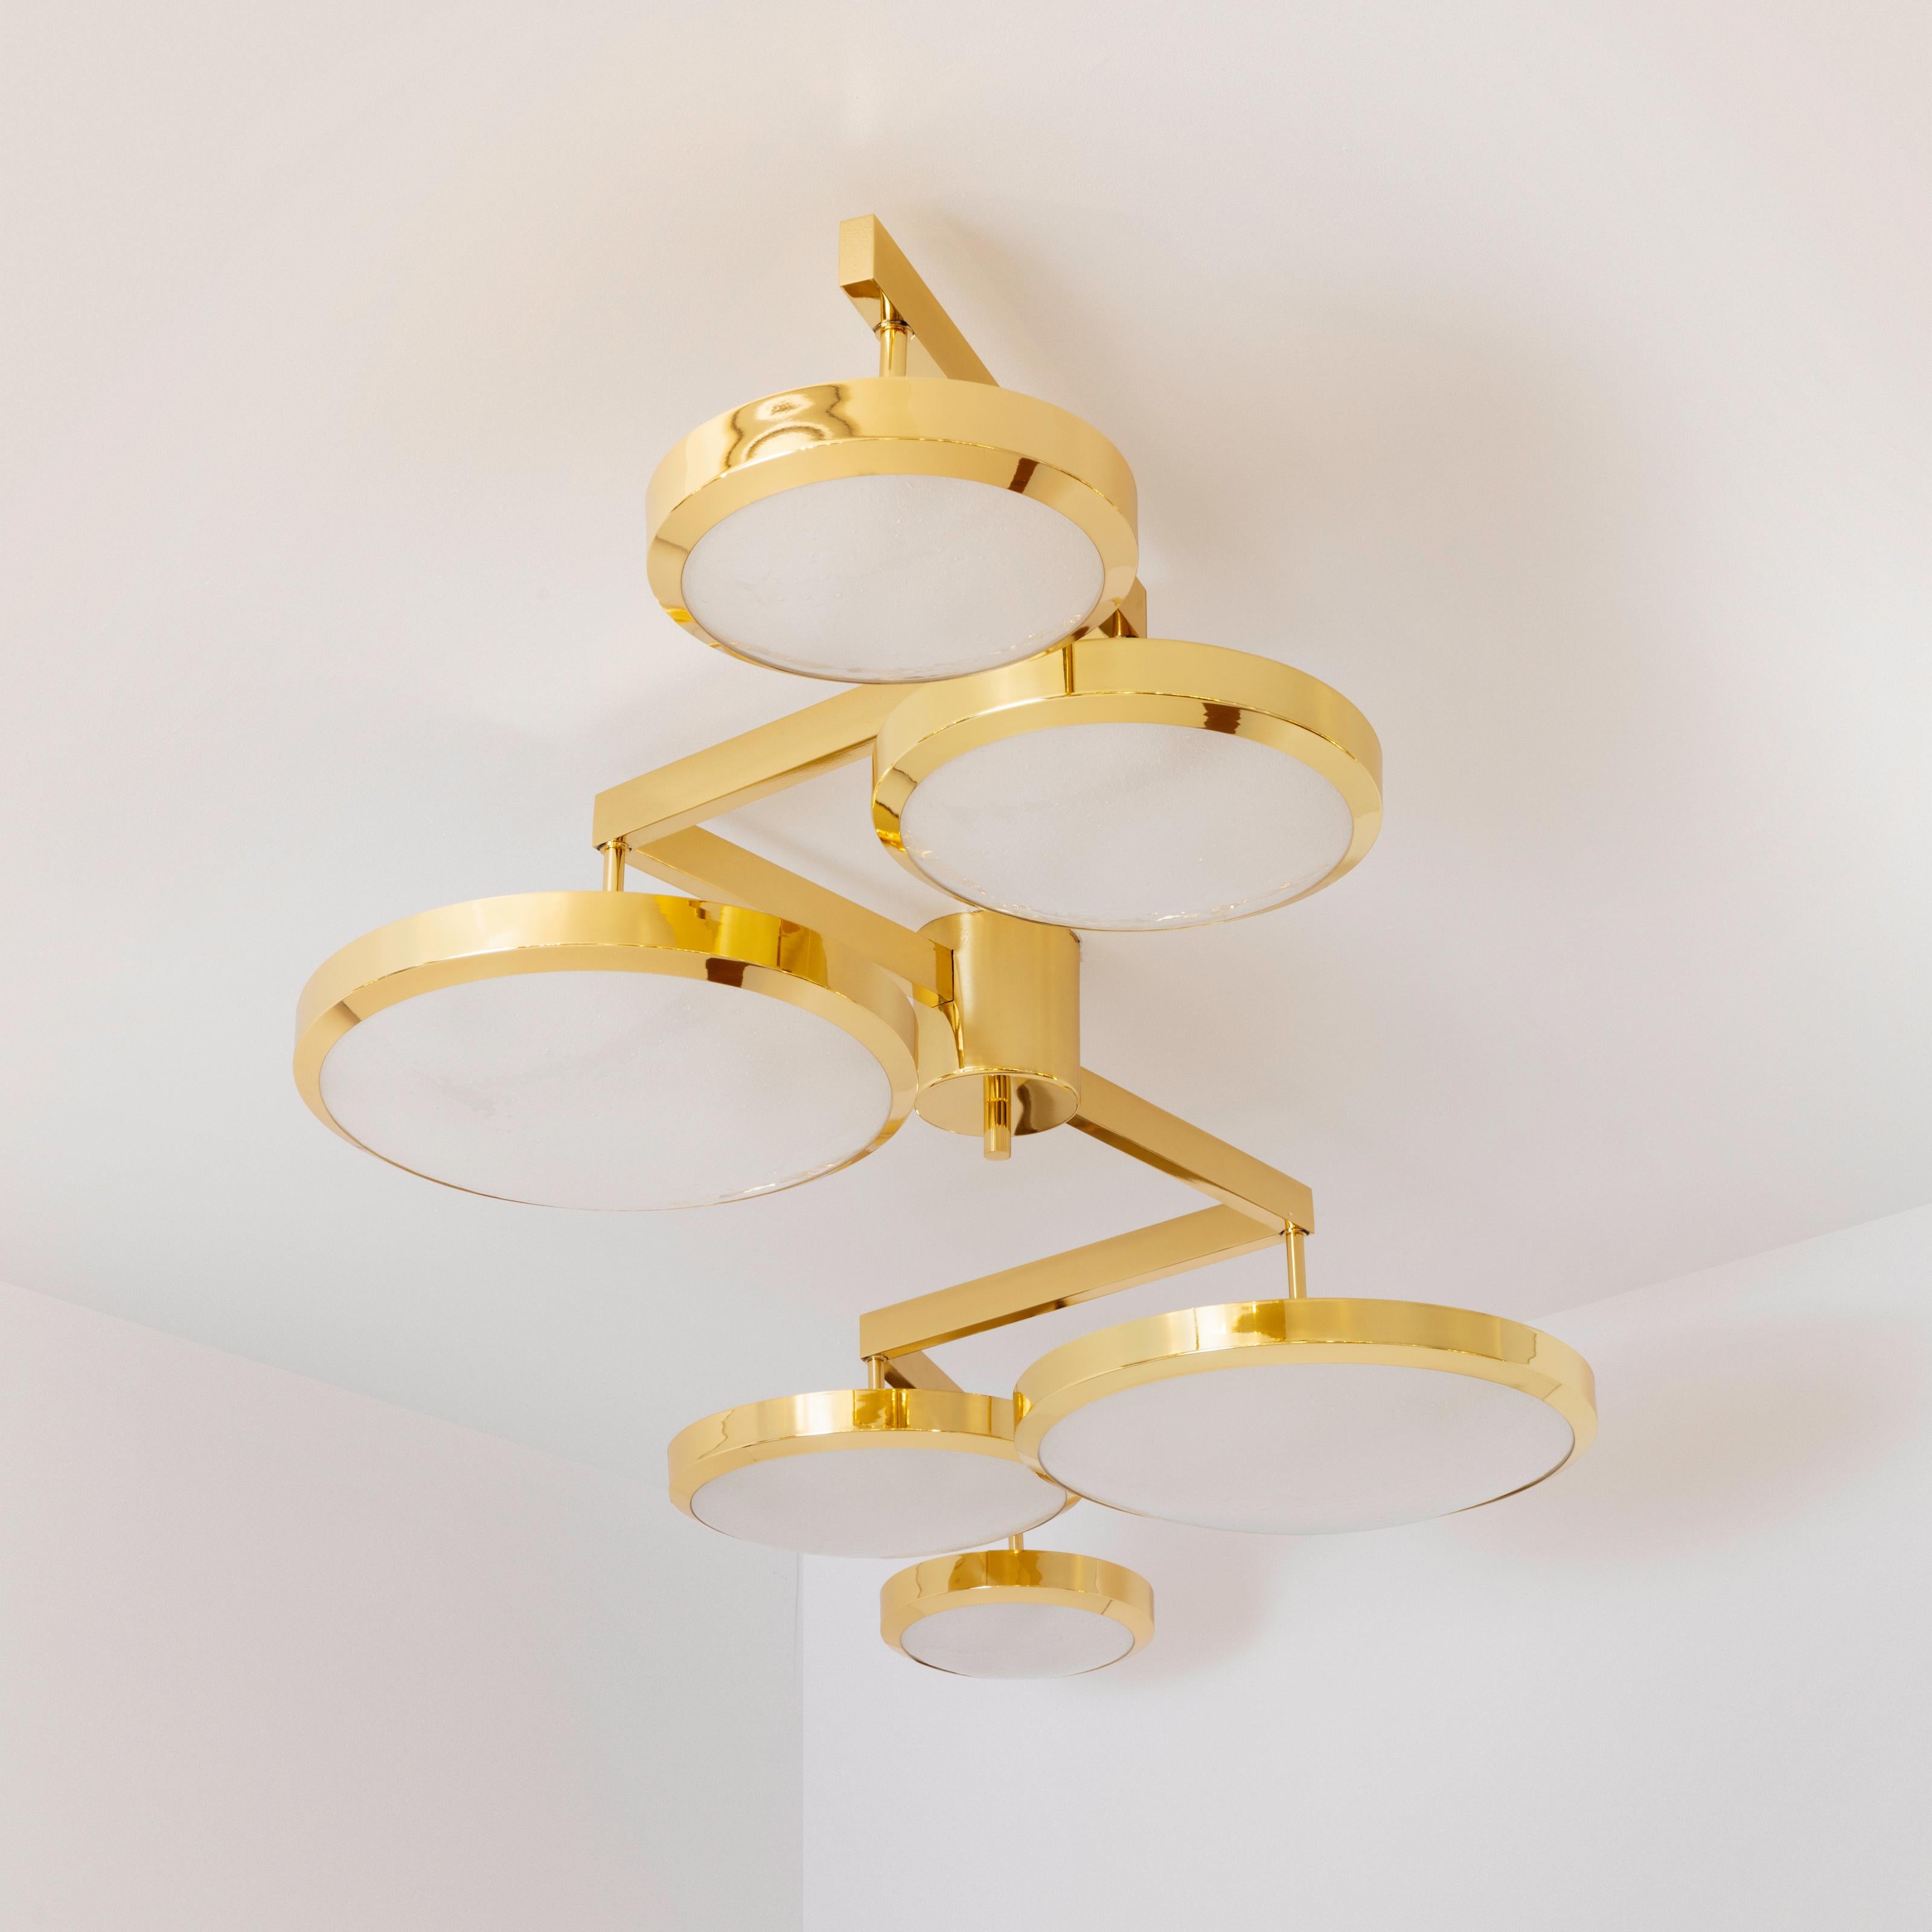 Translated in English to “suspended geometry”, the Geometria Sospesa ceiling light plays with the notion of lines and shapes. The concept is brought to life by its distinctive winding frame with six variable size shades at staggered heights. The